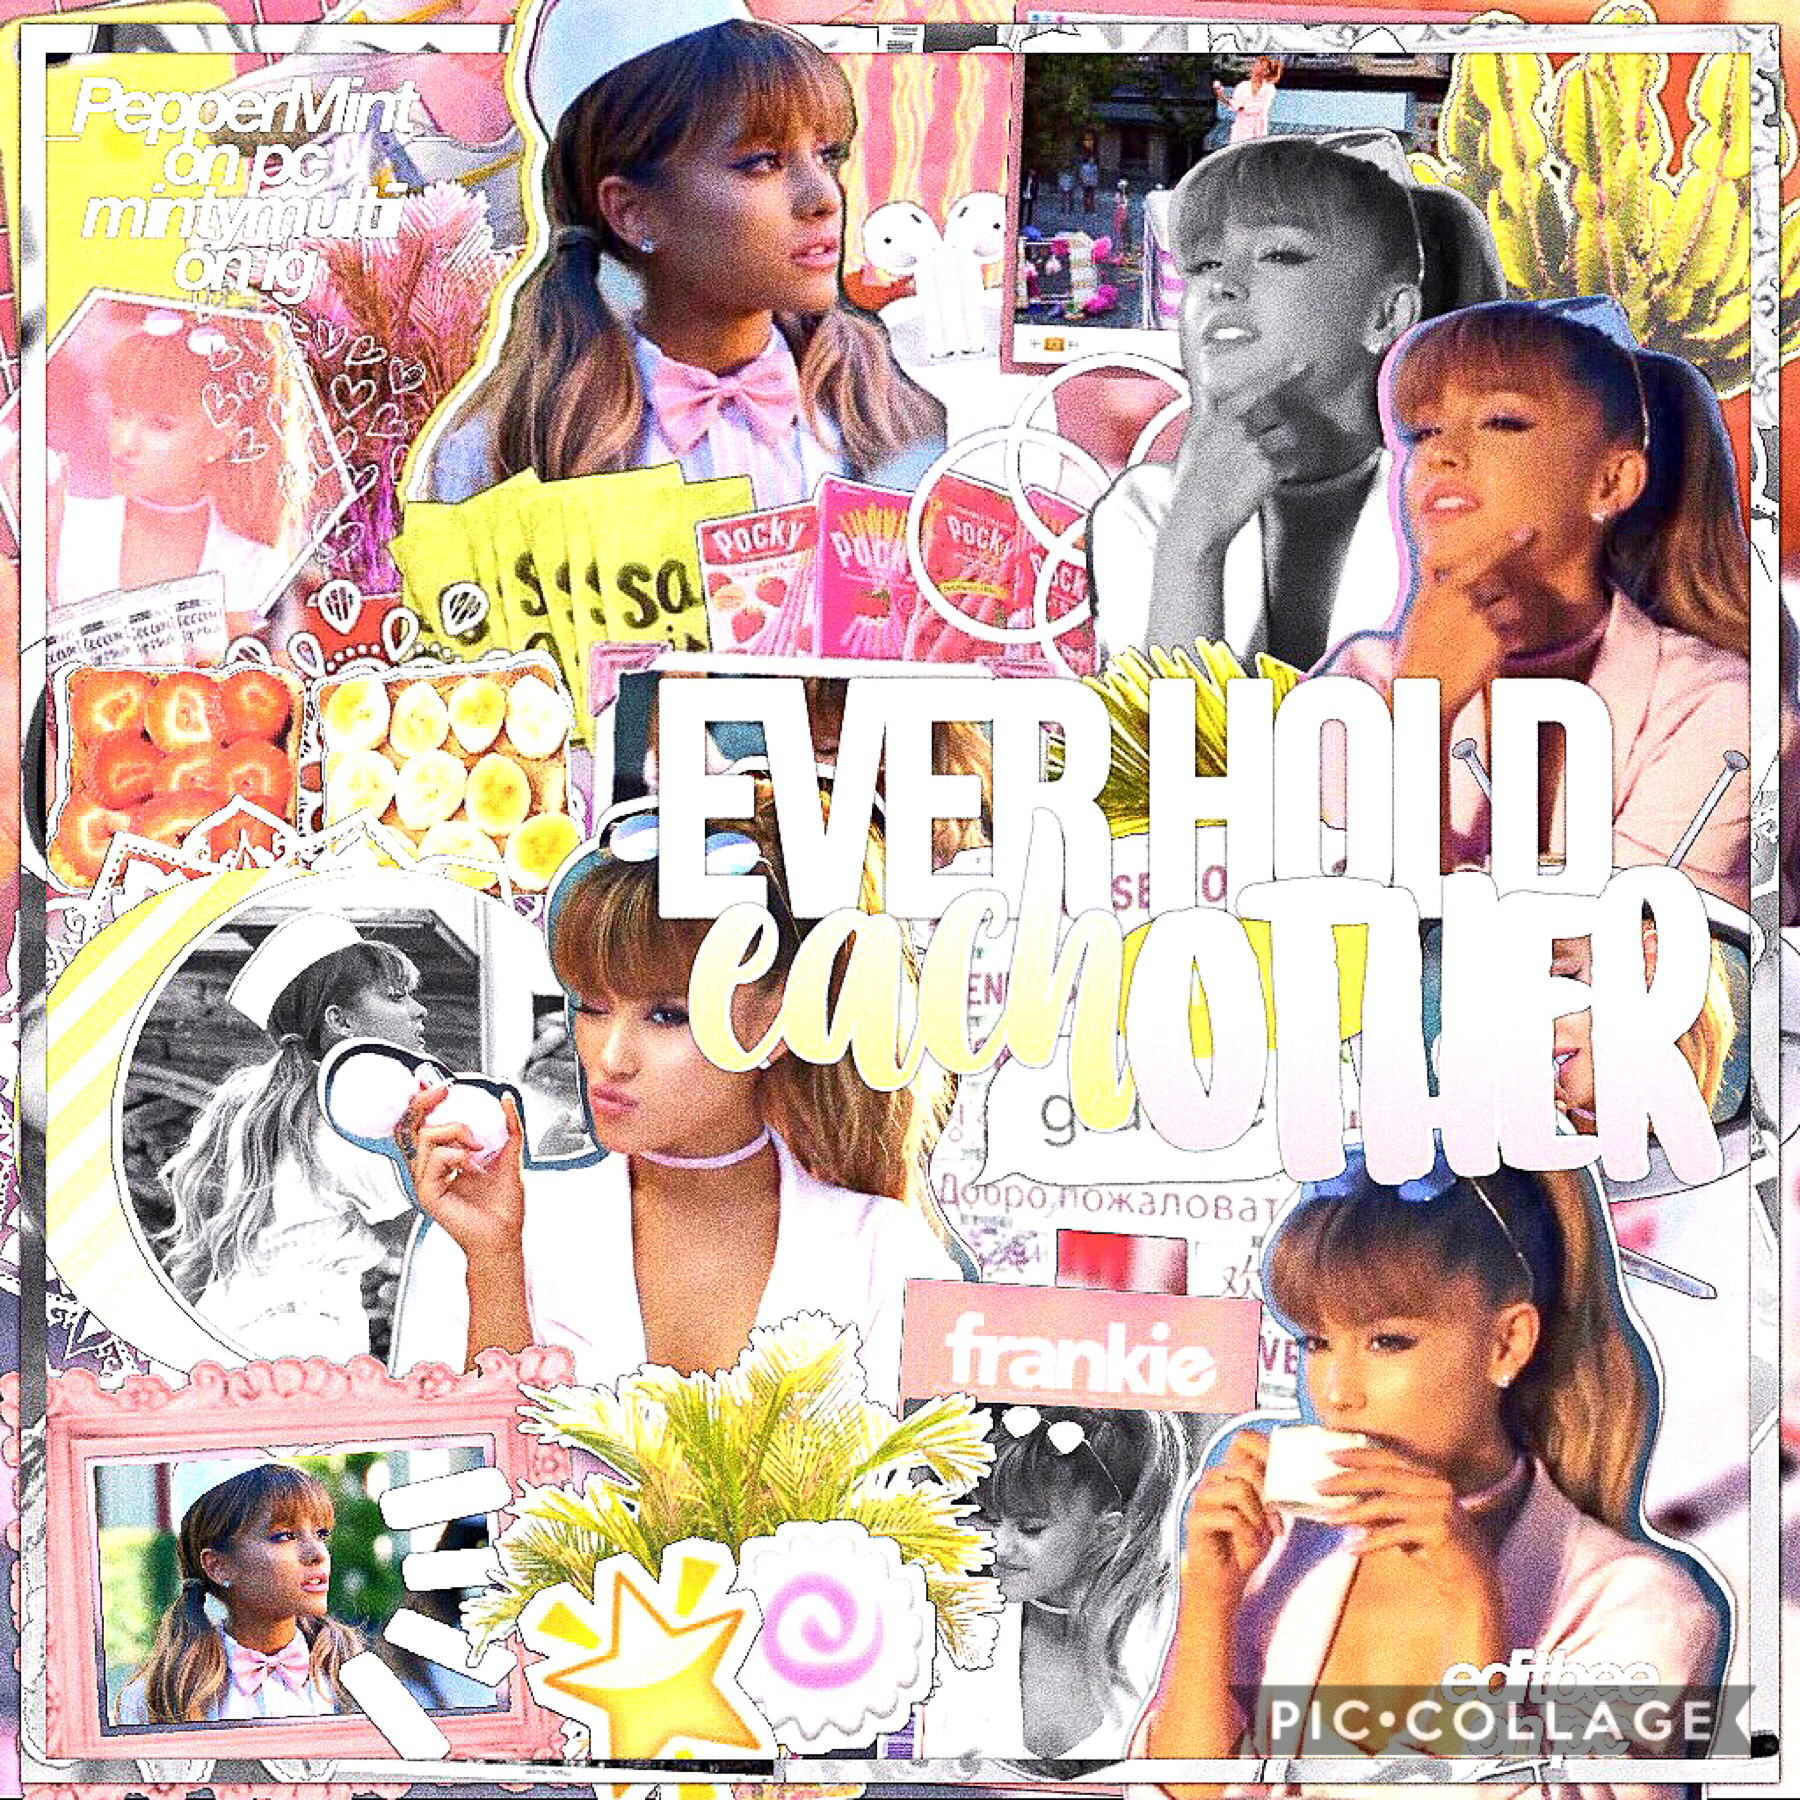 collab w/ my best friend calz🌻💞 you're such an amazing girl, Callie. we need to edit together more often!💗
also sorry my username is blocked by the pc watermark lol